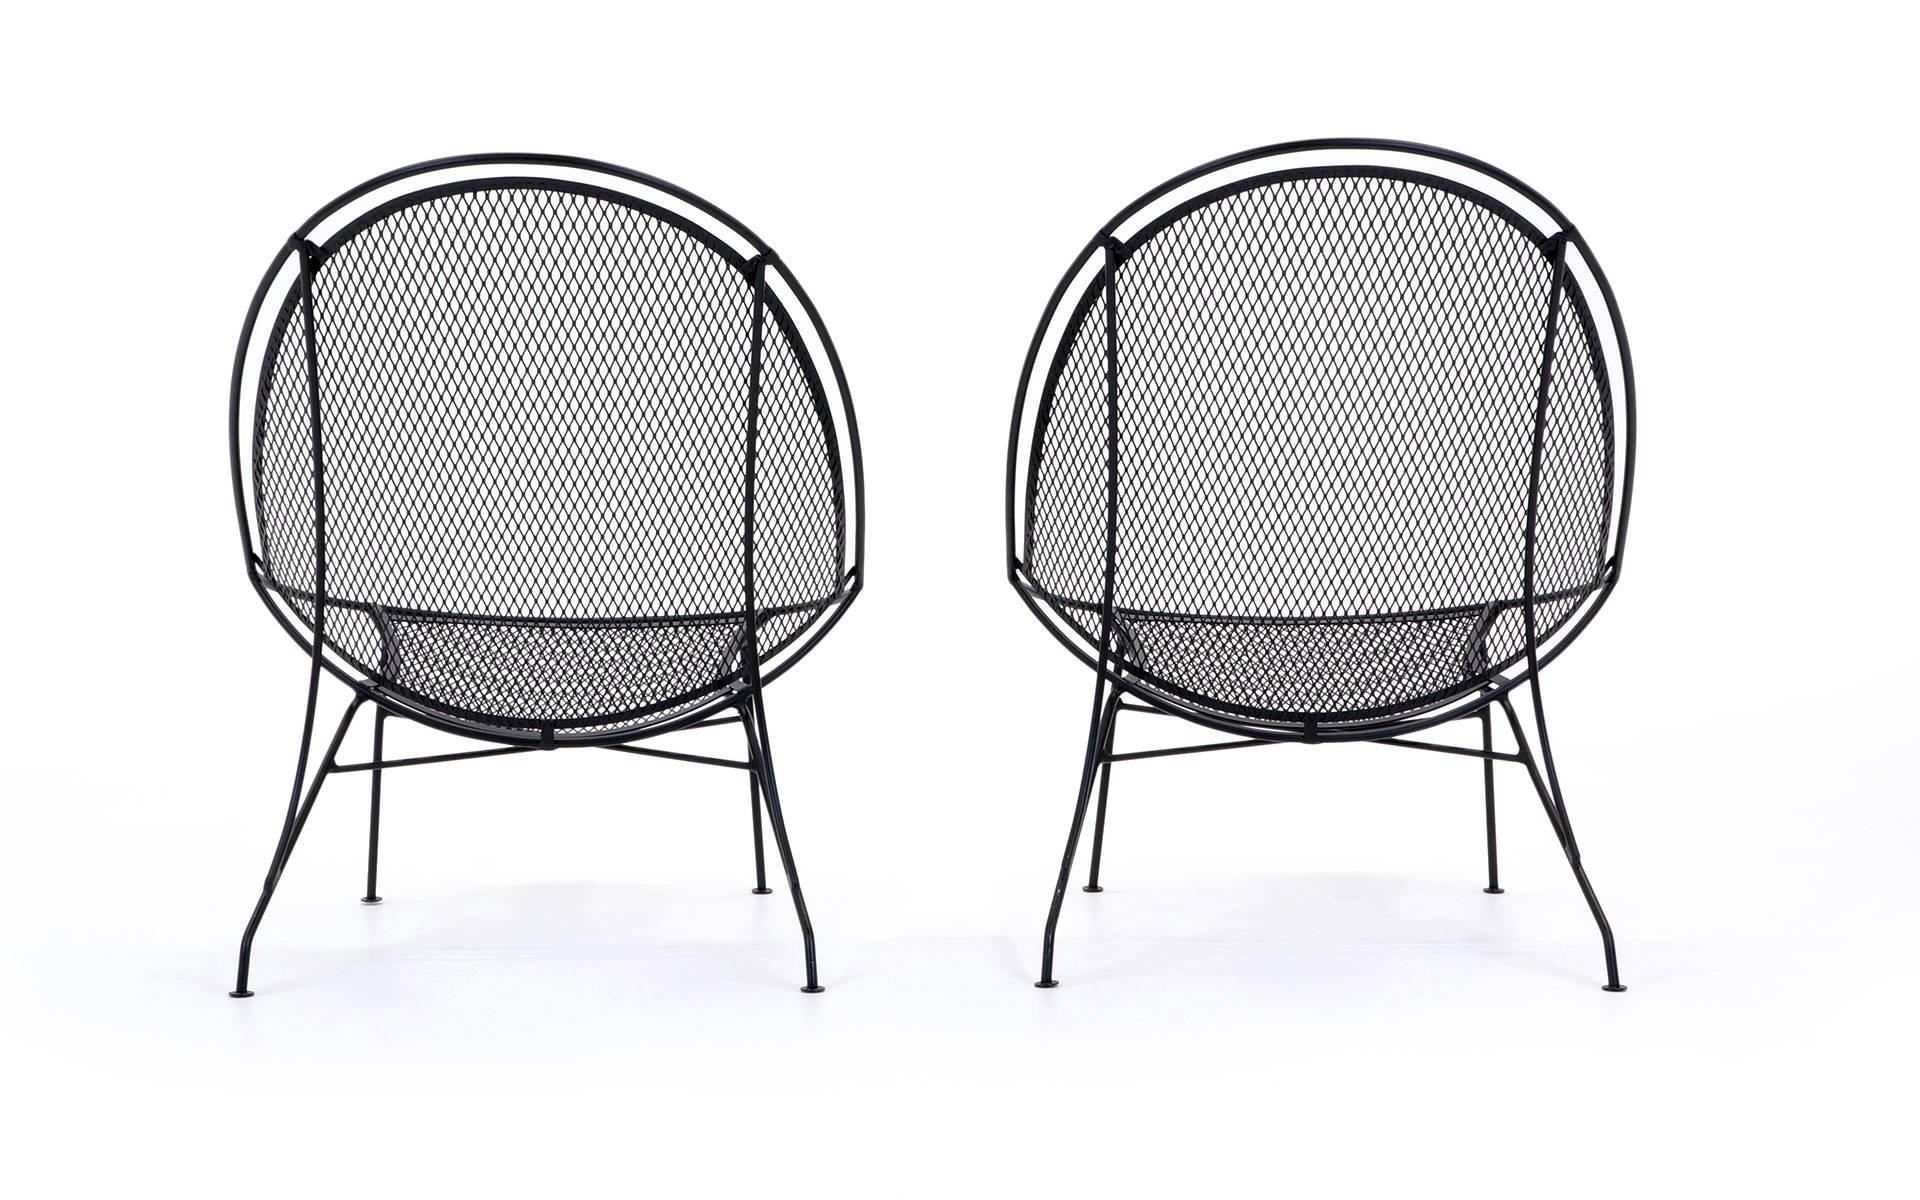 Powder-Coated LAST PAIR John Salterini Patio Chaise Lounge Chairs, Removable Footrest. Black.